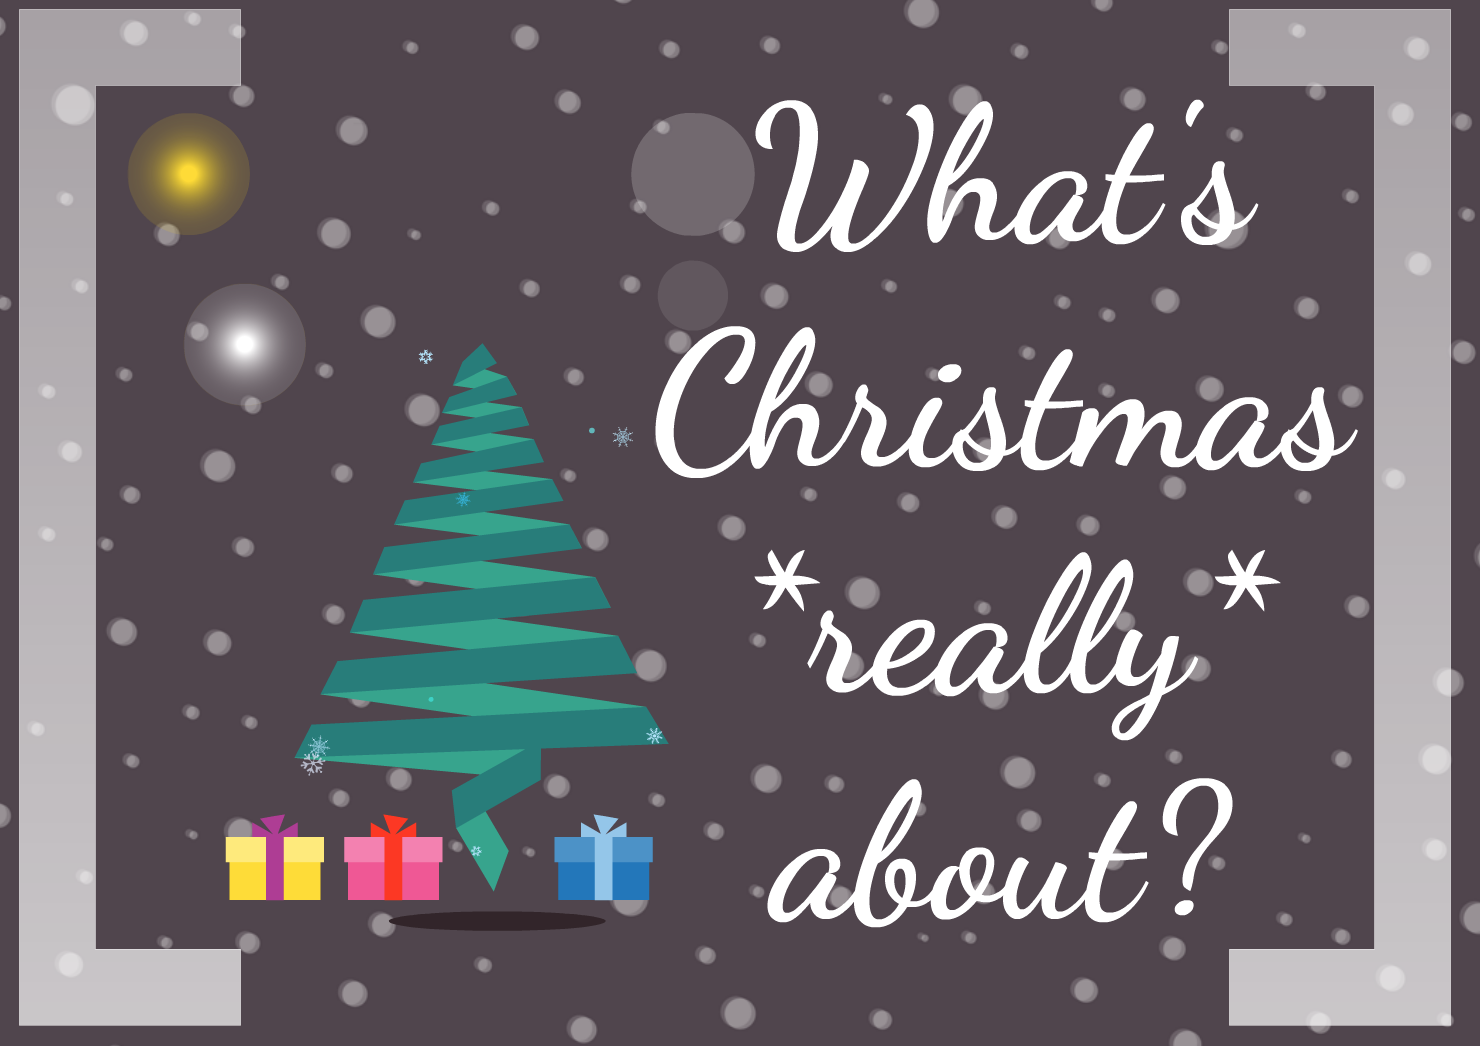 What's Christmas *really* about?